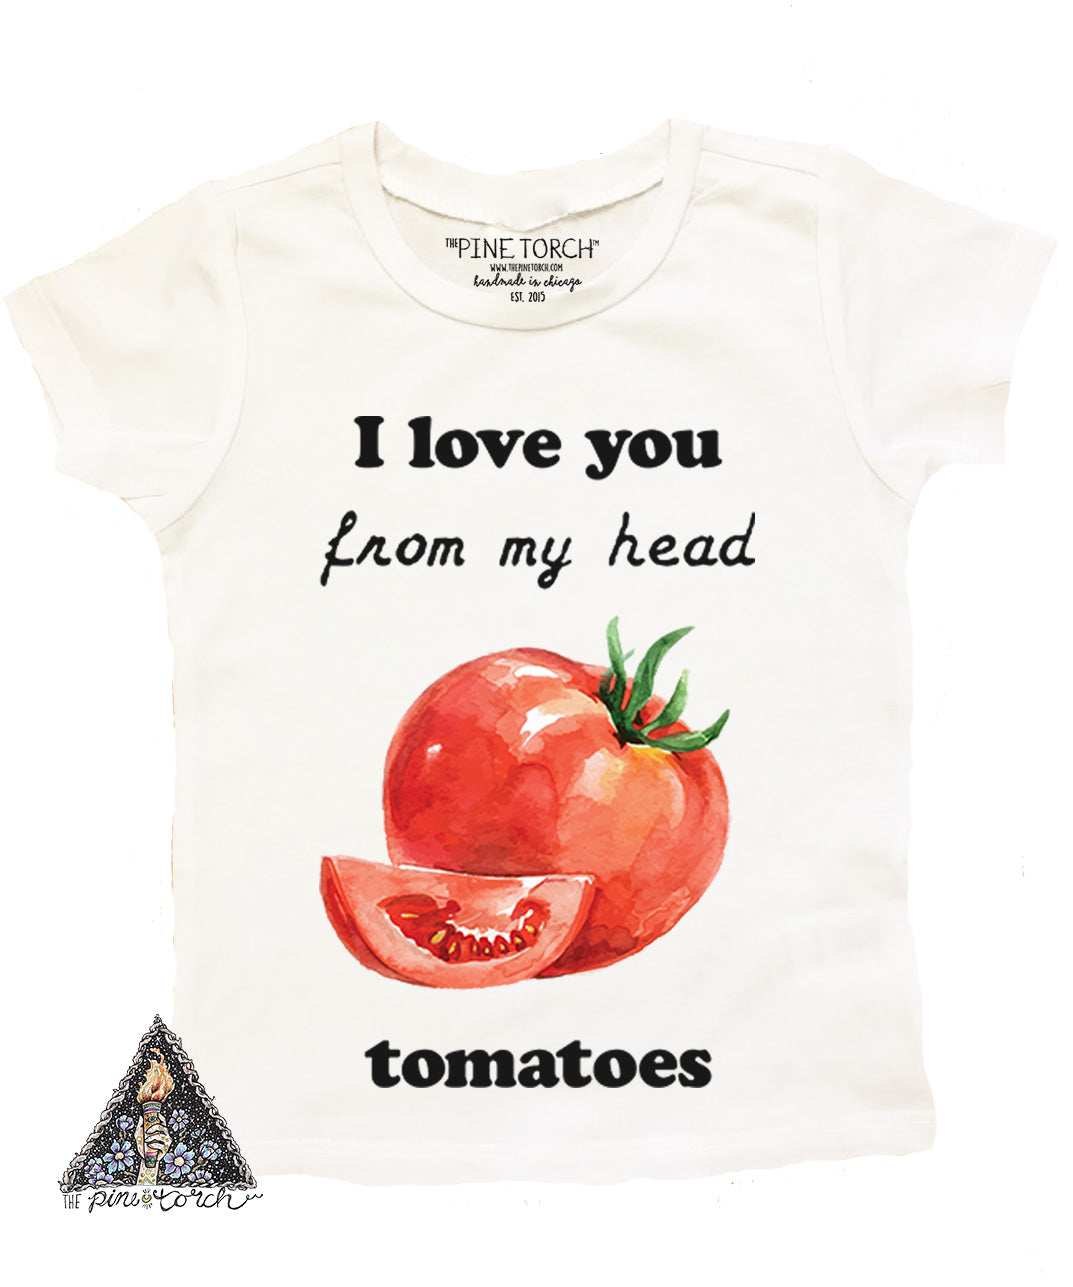 « I LOVE YOU FROM MY HEAD TOMATOES » KID'S TEE